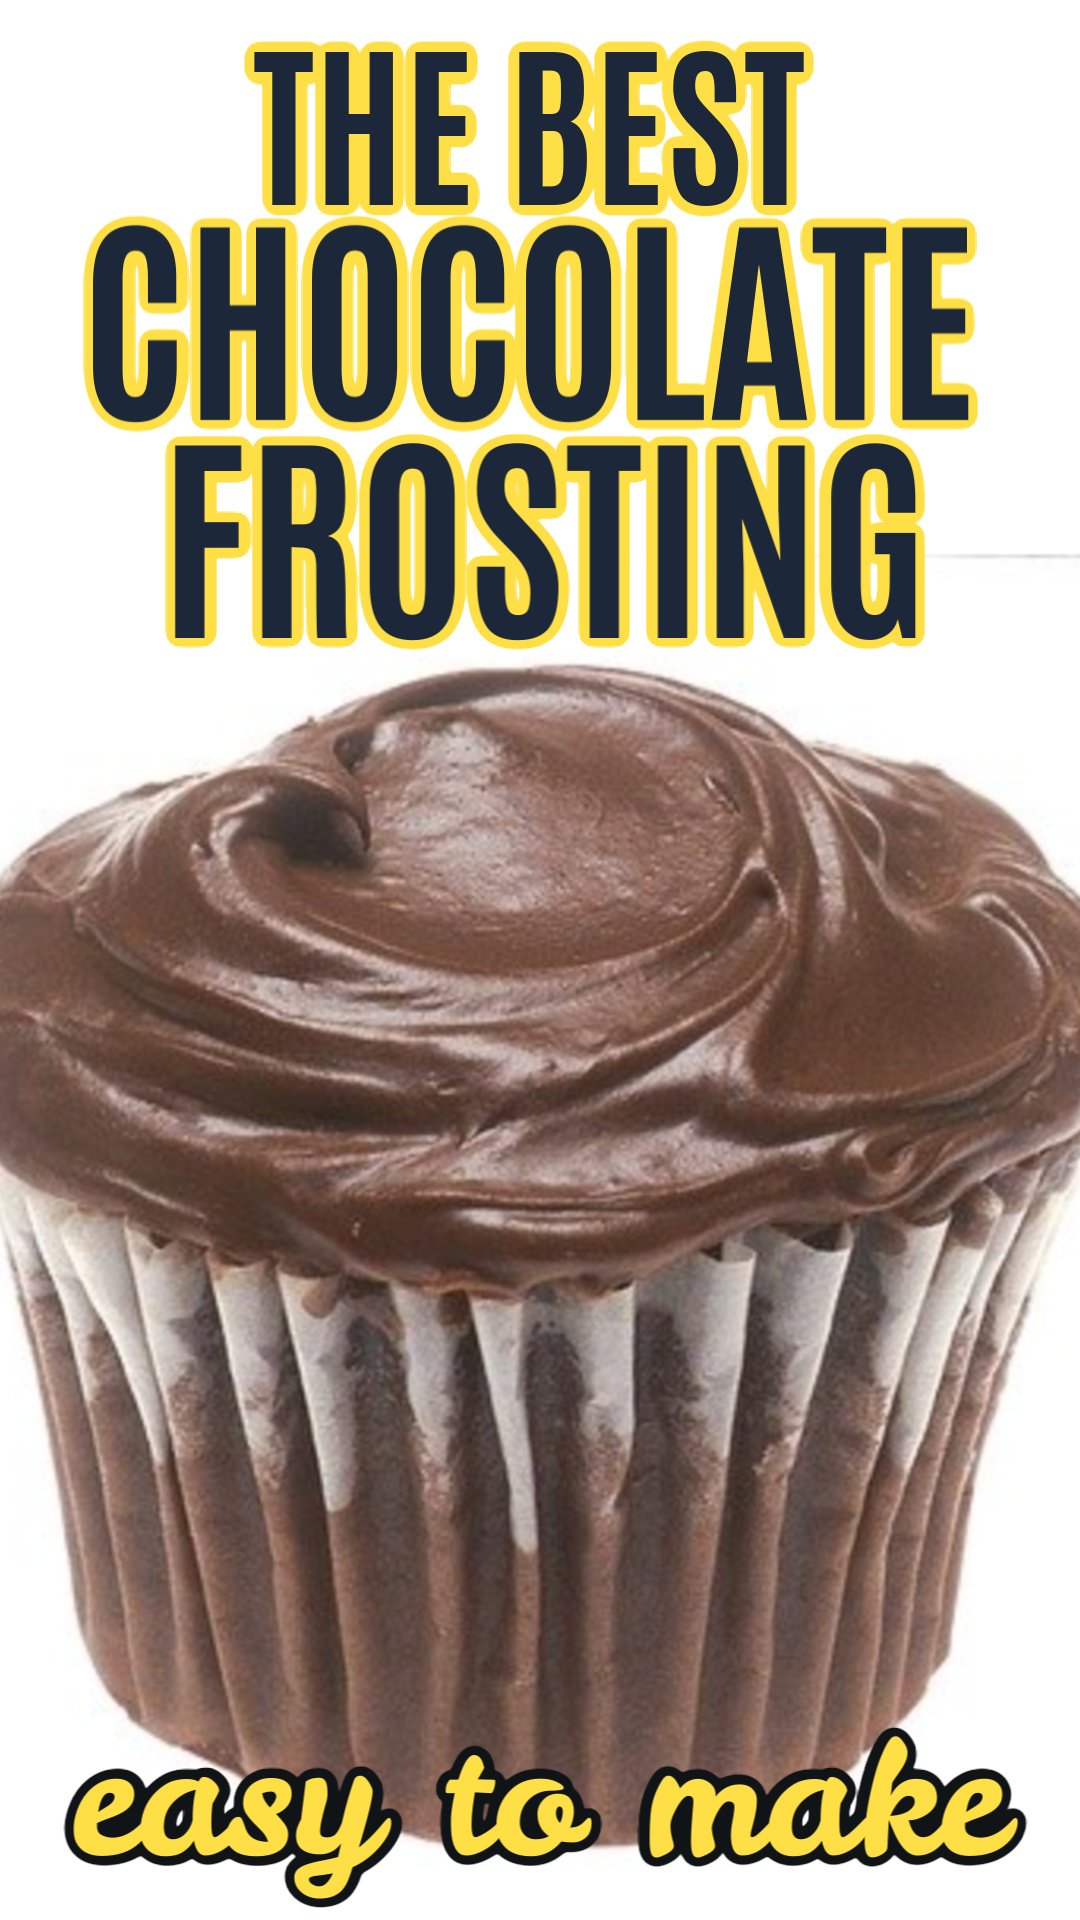 Easy Chocolate Frosting Recipe - The Best Ever! - Thrifty Jinxy